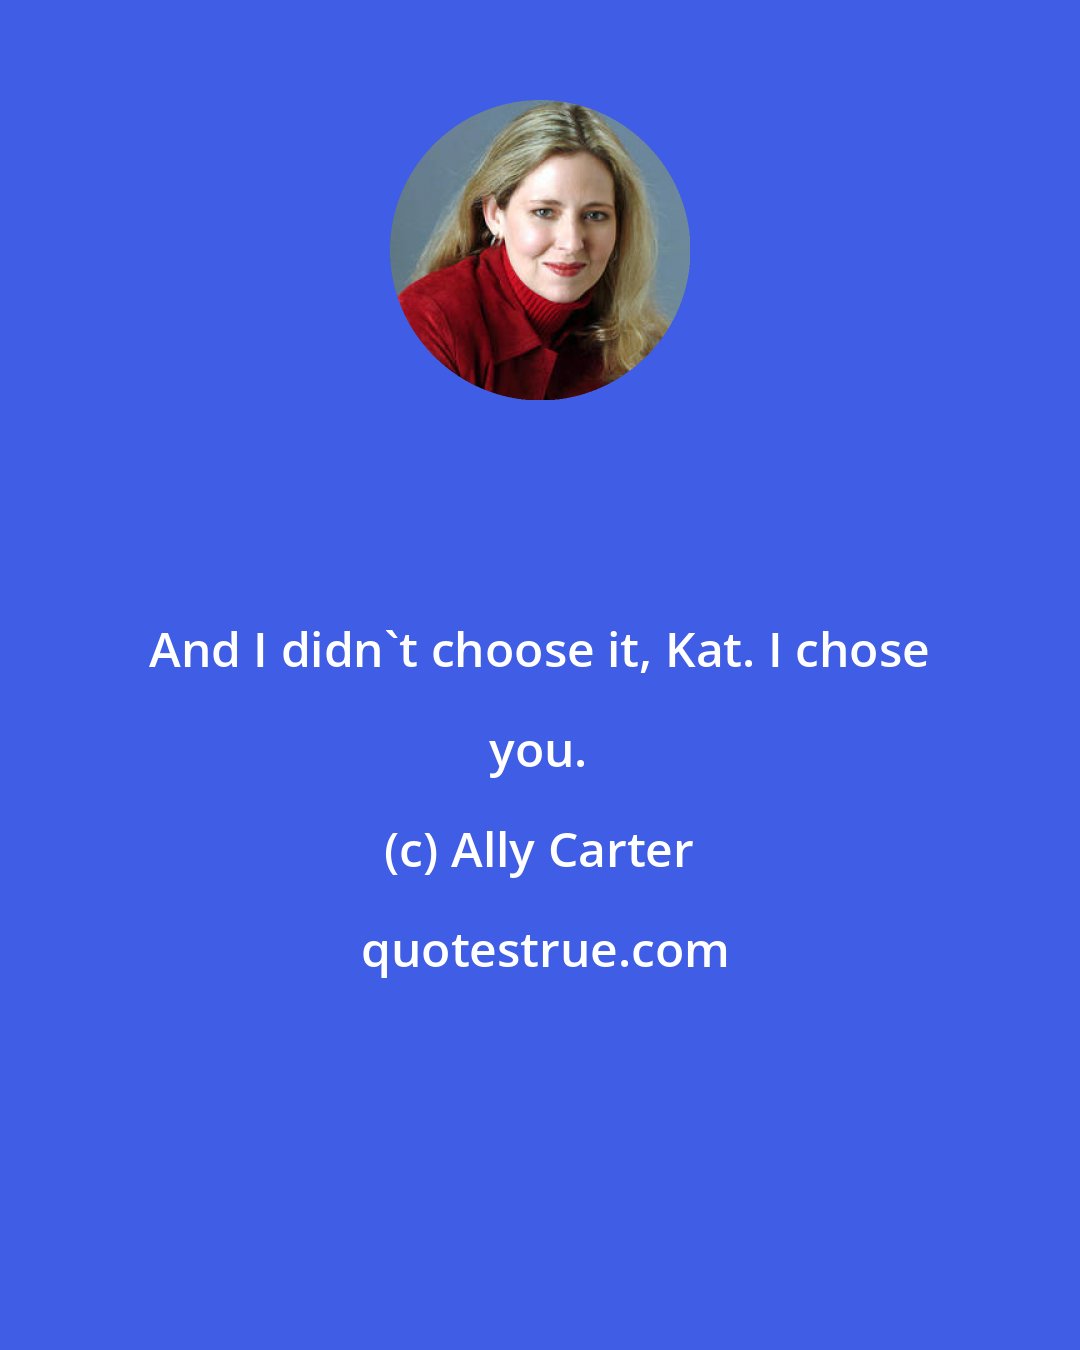 Ally Carter: And I didn't choose it, Kat. I chose you.